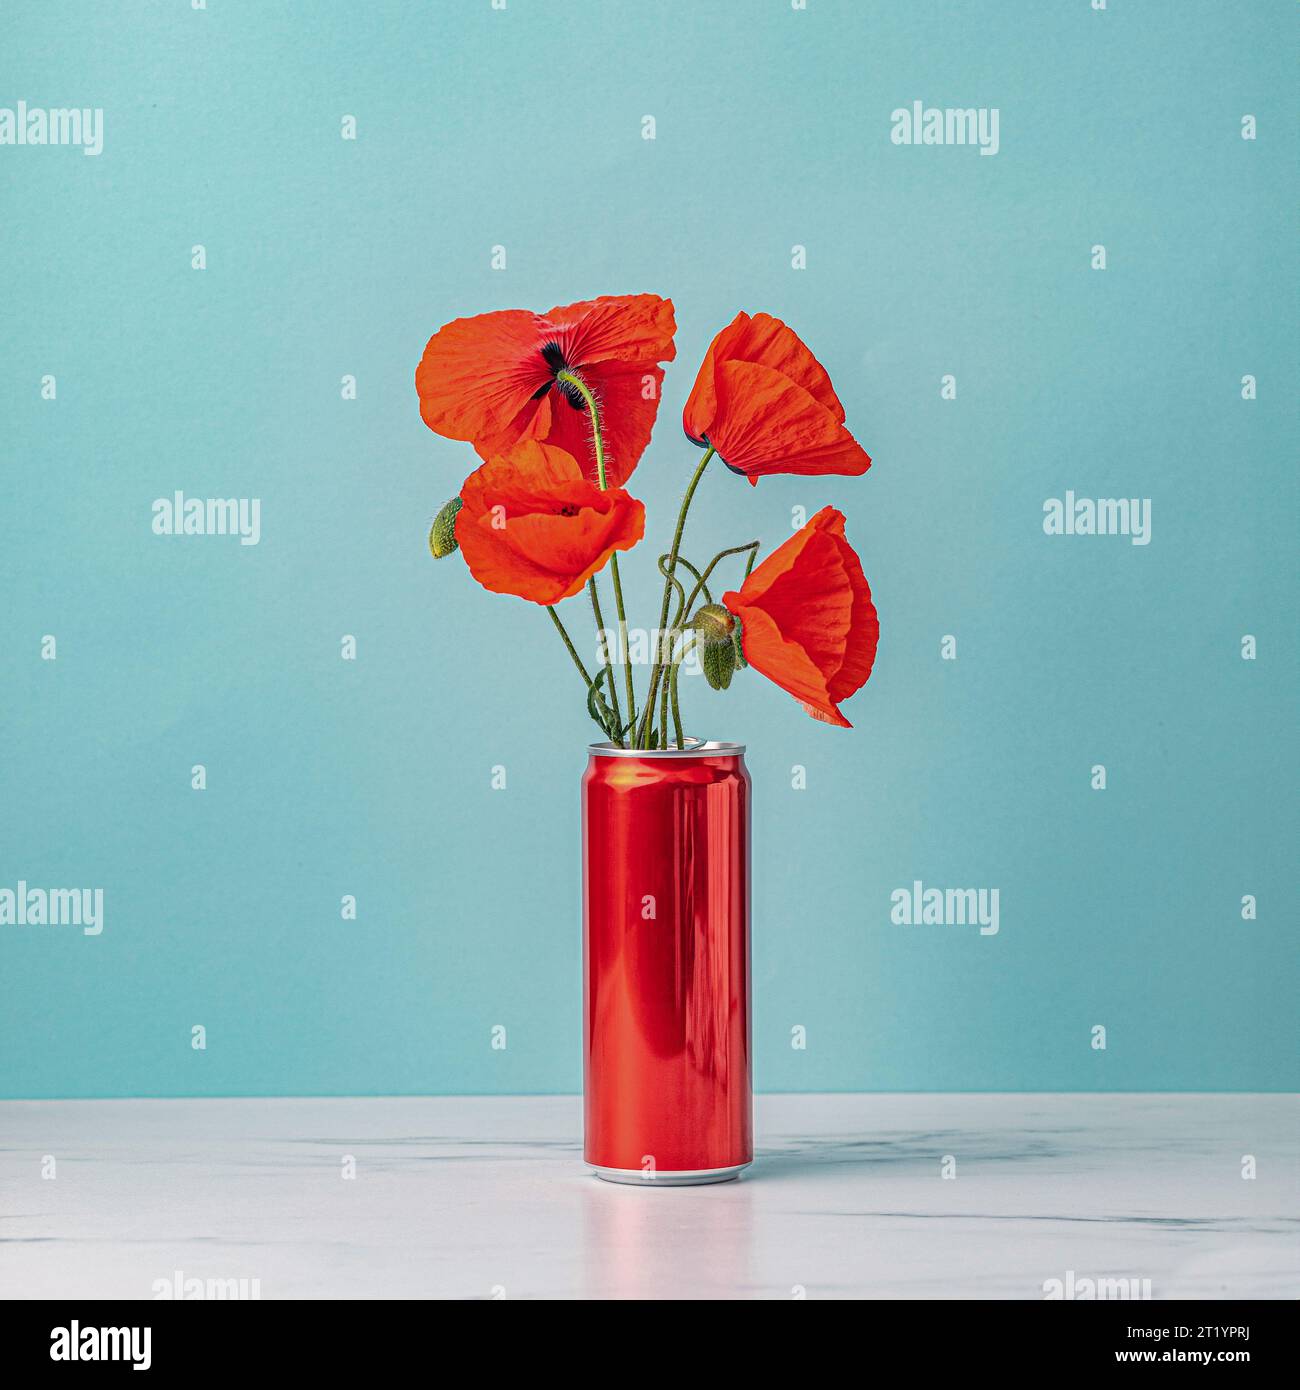 art photography blooming red poppy on red can jar on blue  background Stock Photo